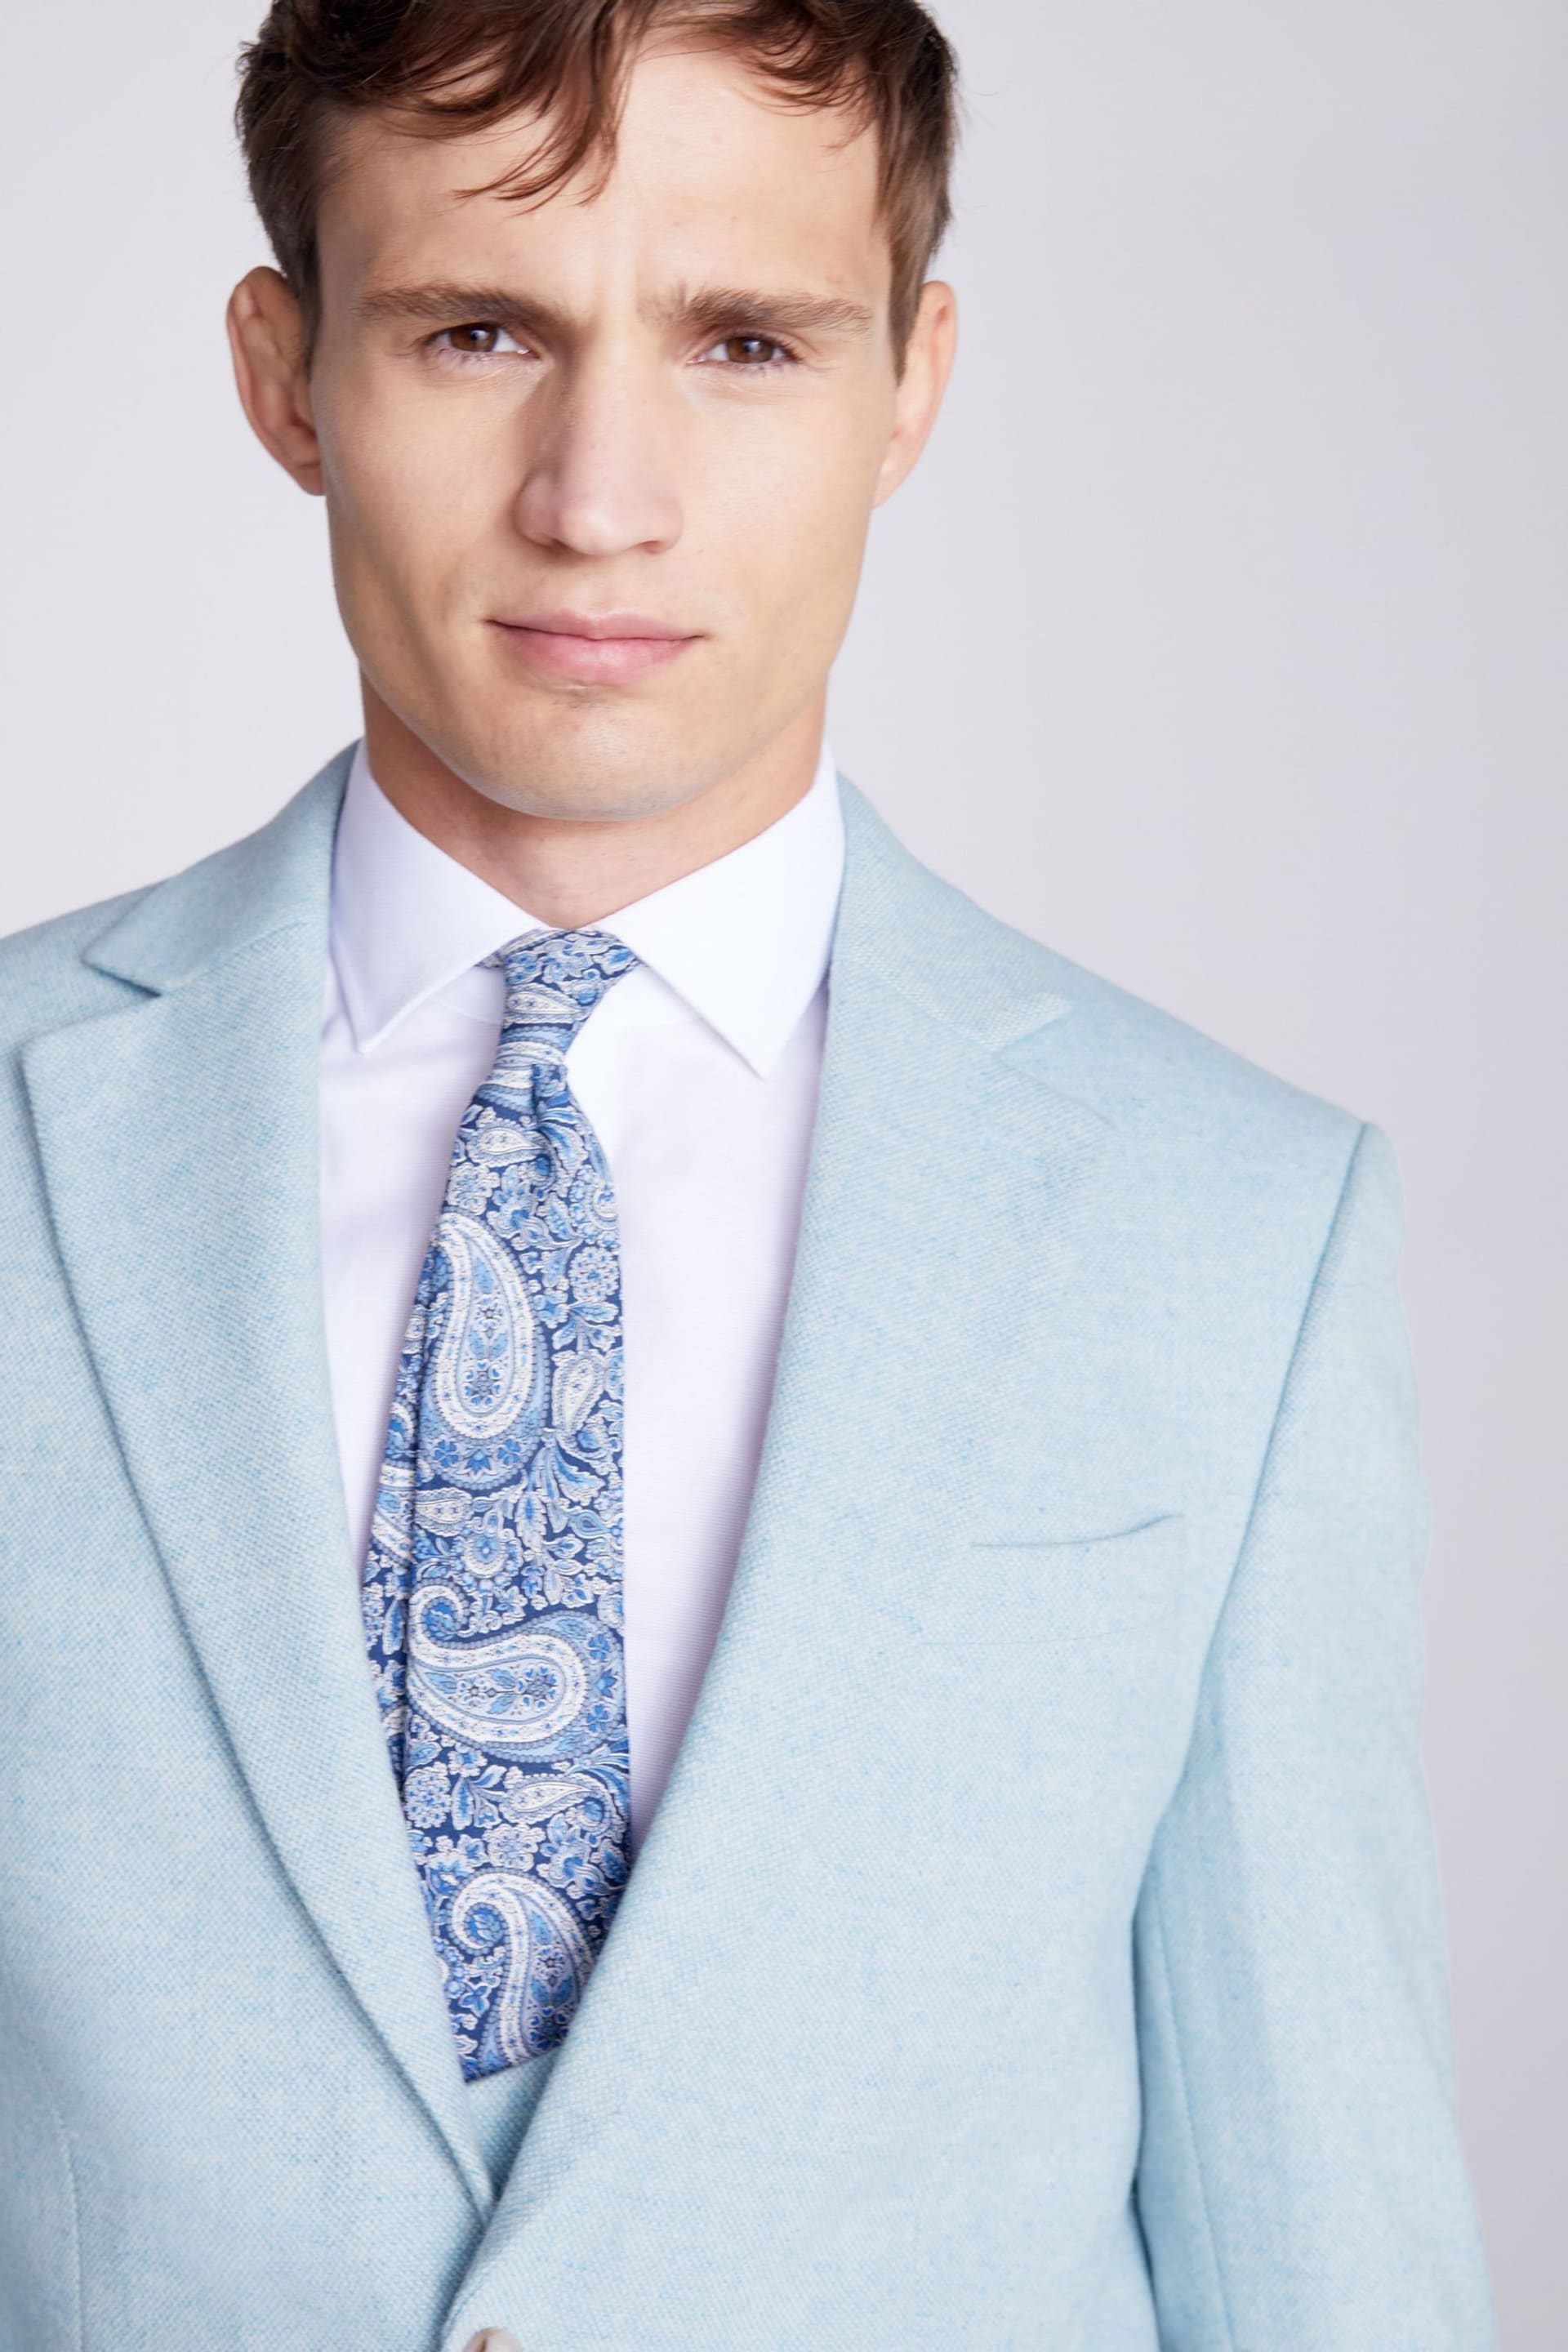 MOSS Blue Tailored Fit Donegal Jacket - Image 5 of 5